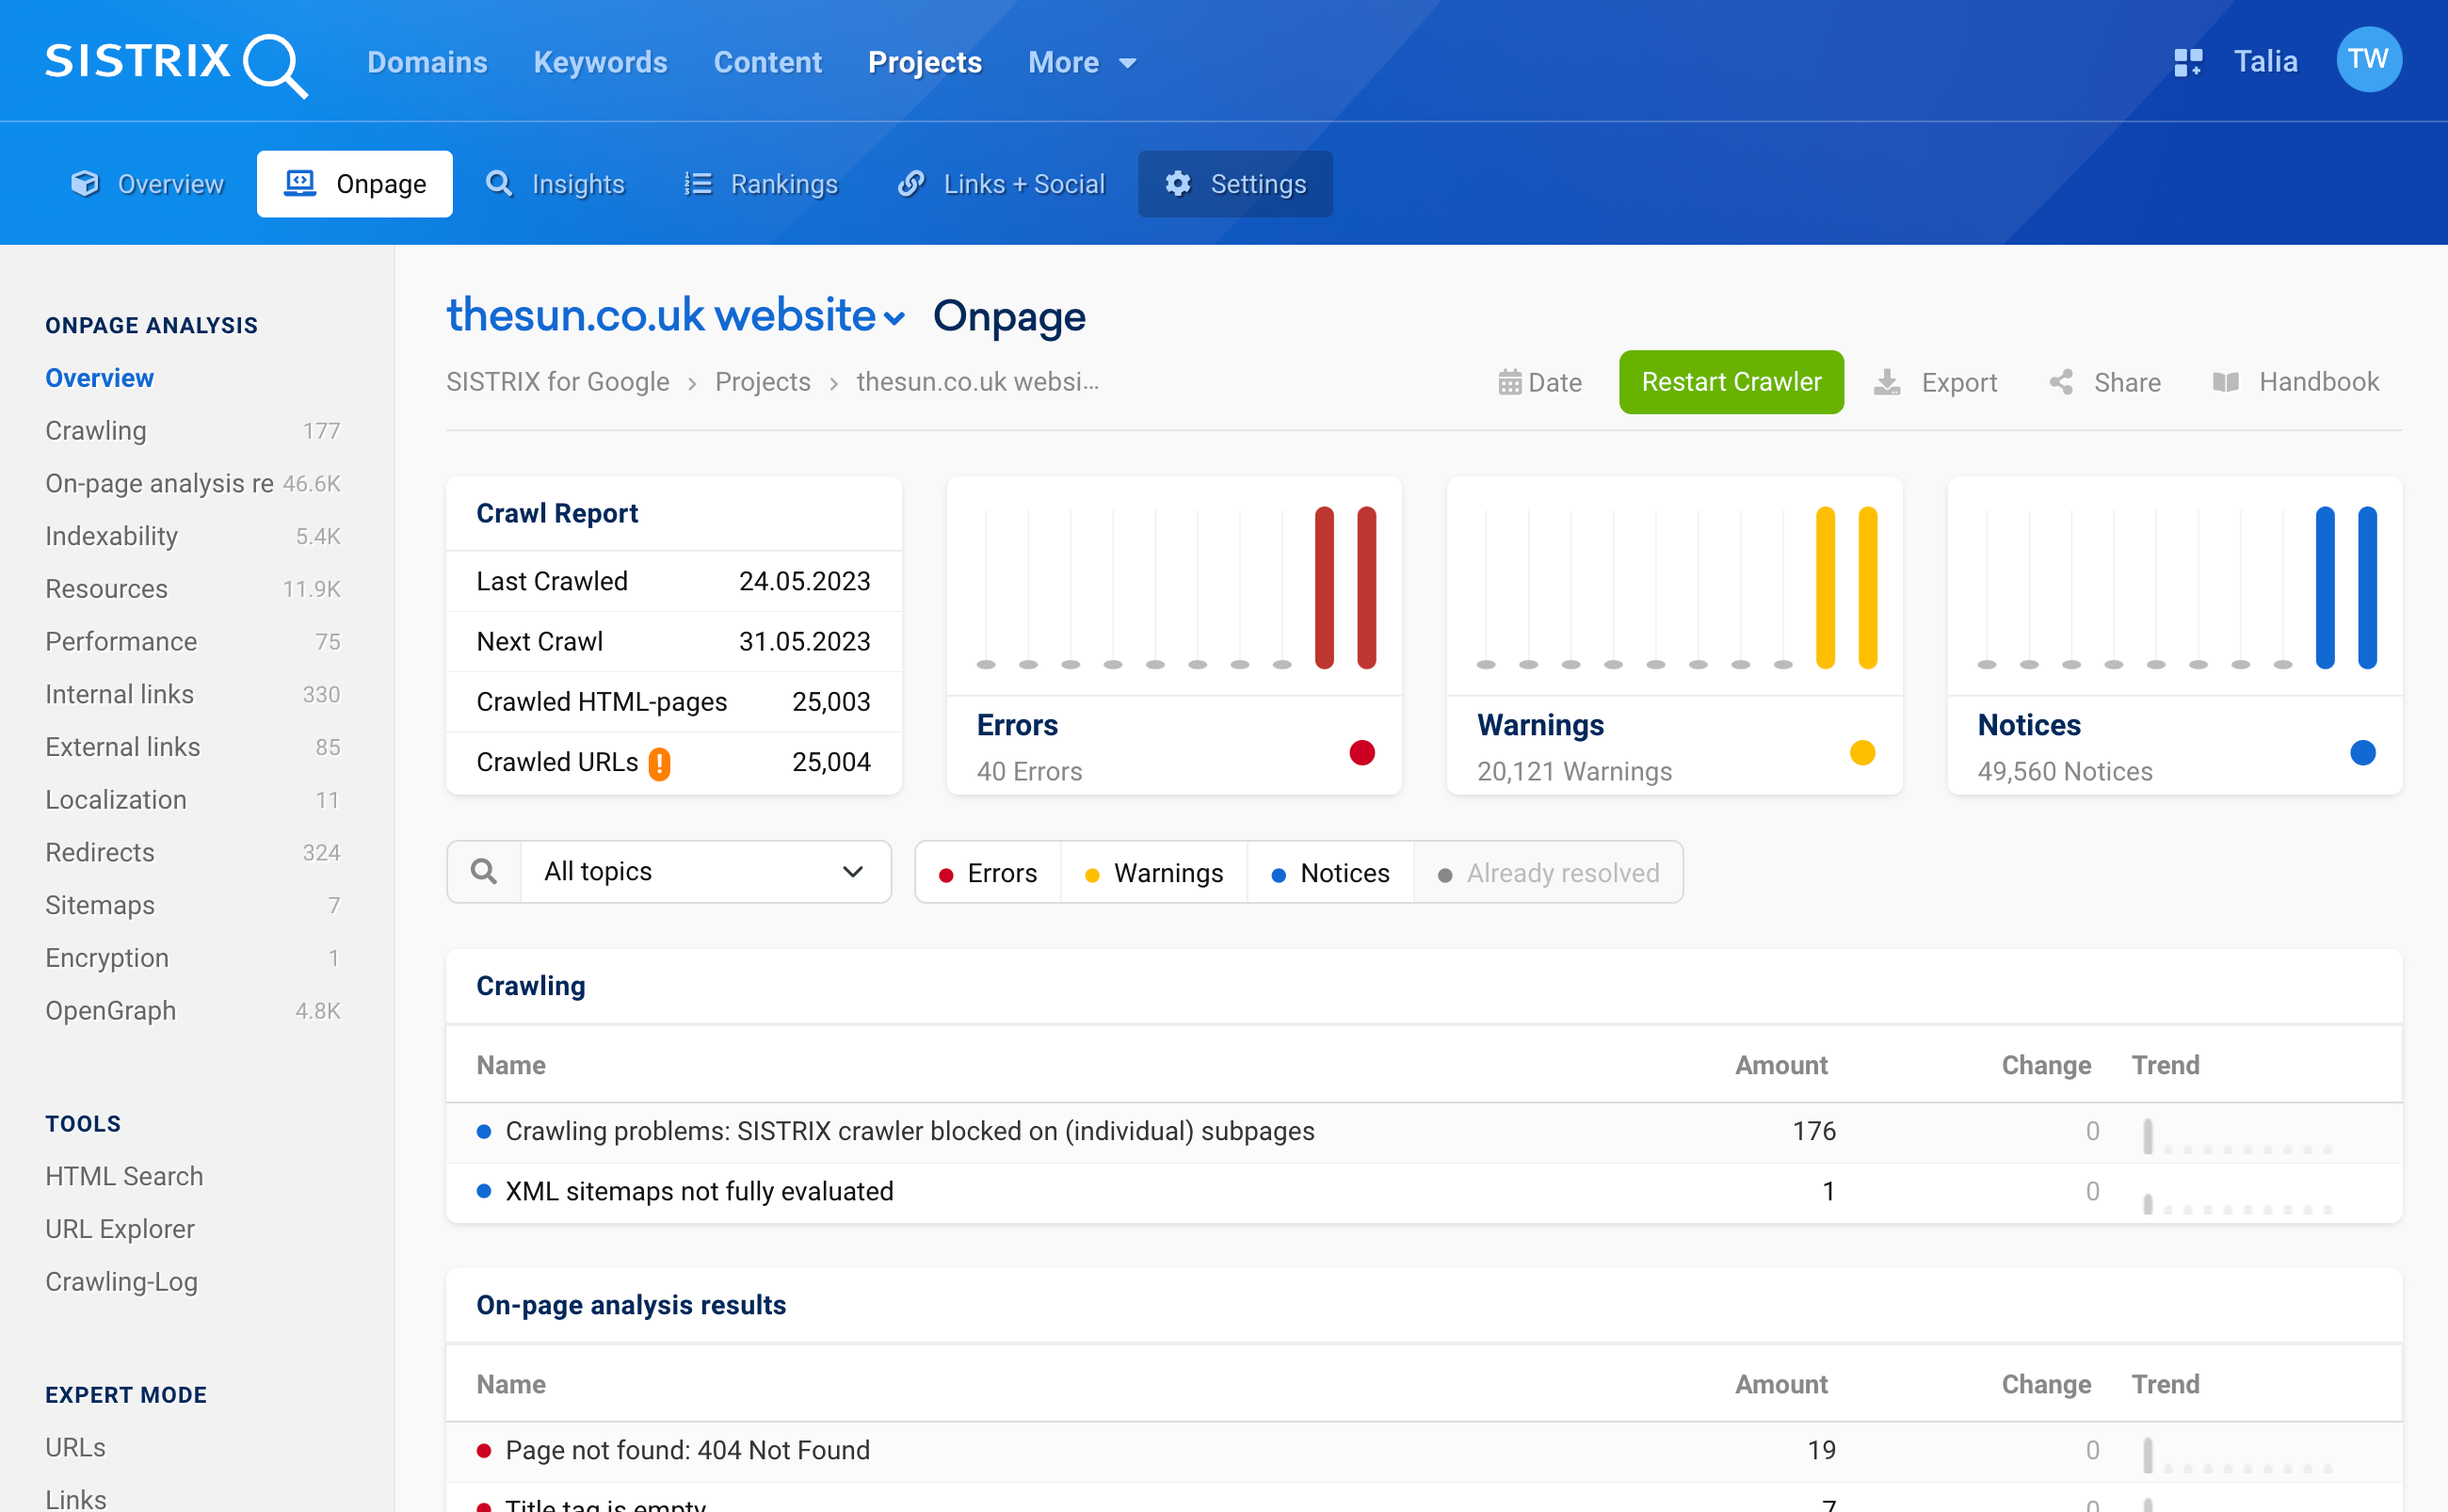 The Onpage Overview of our example project for the domain thesun.co.uk.